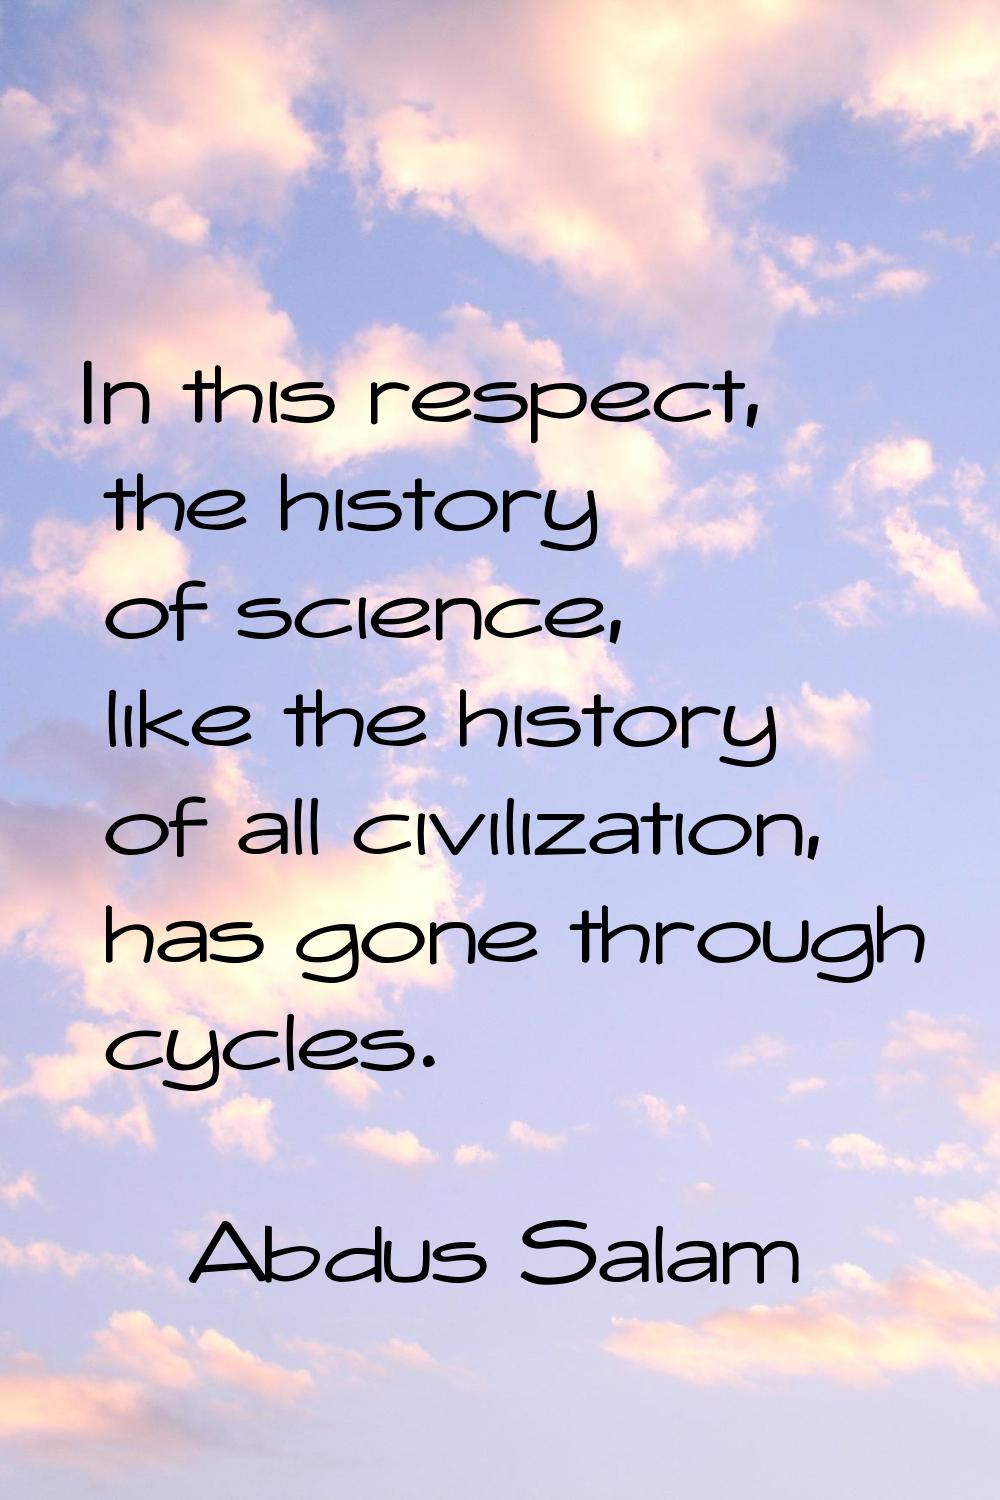 In this respect, the history of science, like the history of all civilization, has gone through cyc